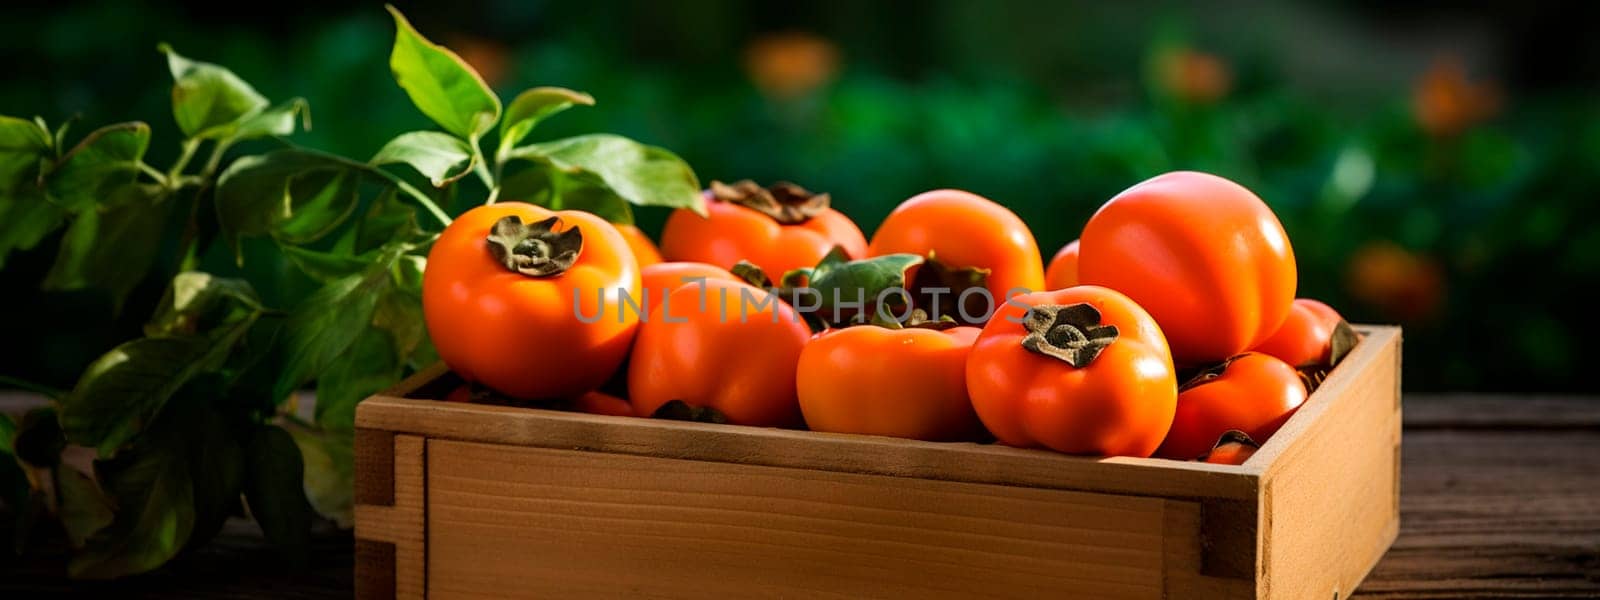 Persimmon harvest in a box in the garden. Selective focus. Food.